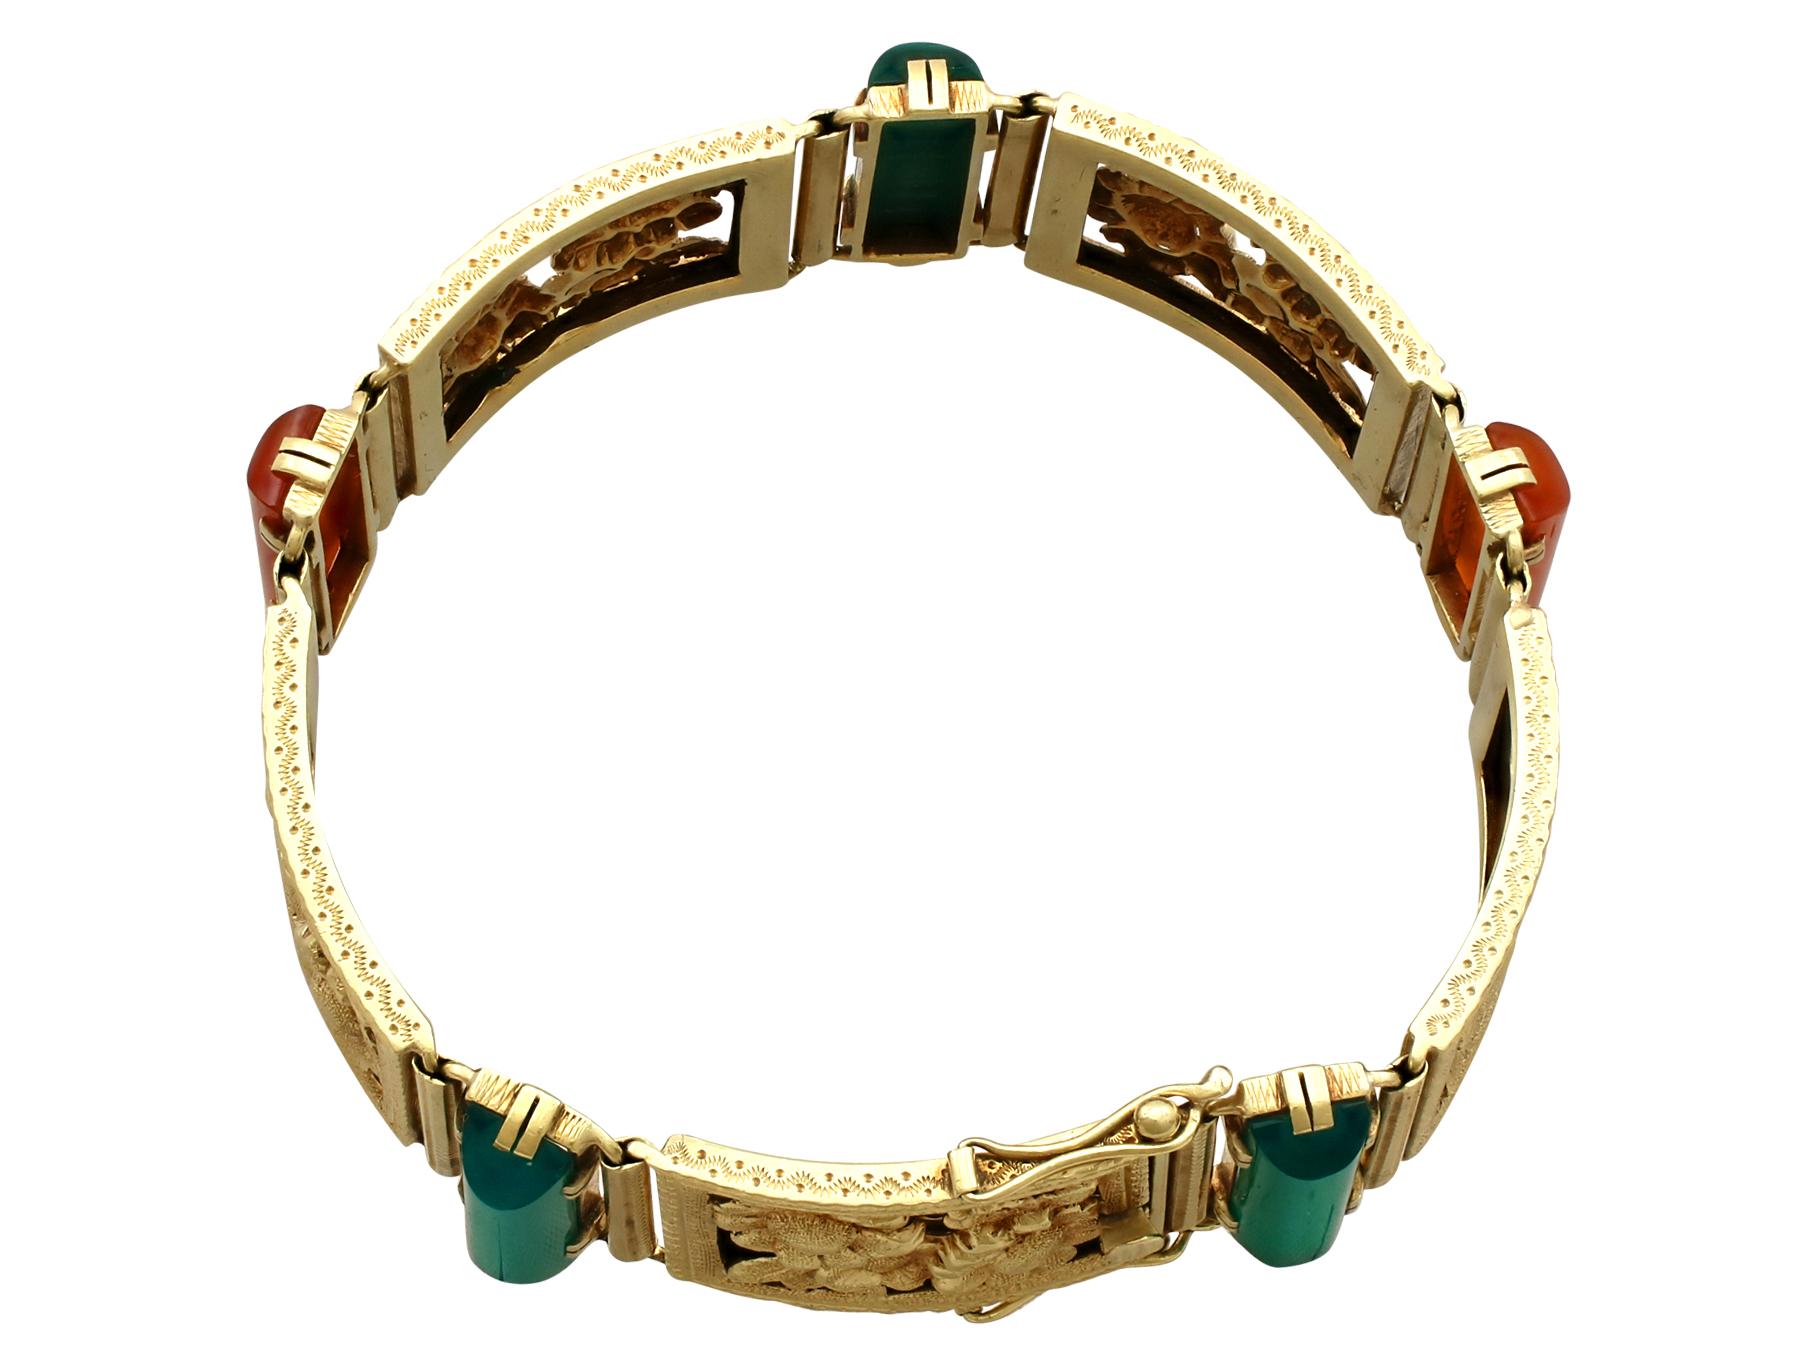 A stunning antique 1930s 12.80 carat stained agate and 4.23 carat malachite, 14 karat yellow gold bracelet; part of our diverse antique jewelry and estate jewelry collections.

This stunning, fine and impressive antique gemstone bracelet has been